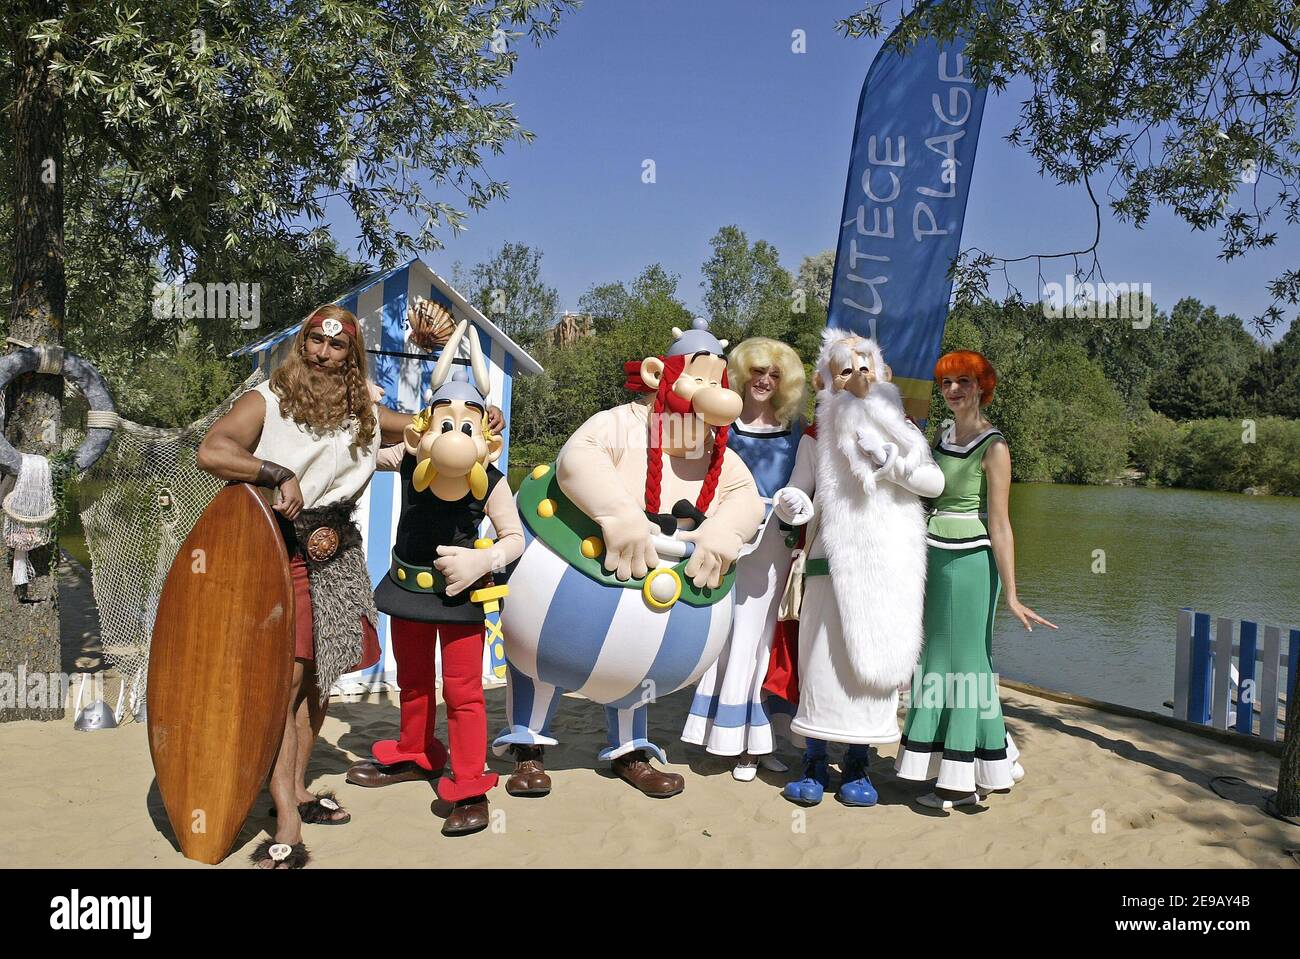 Asterix,Obelix,Panoramix, Falbala and Bonemine attend the new attraction  'The vikings are disembarking' at Park Asterix in Plailly near Paris,  France on June 17, 2006. Photo by Edouard Bernaux/ABACAPRESS.COM Stock  Photo - Alamy